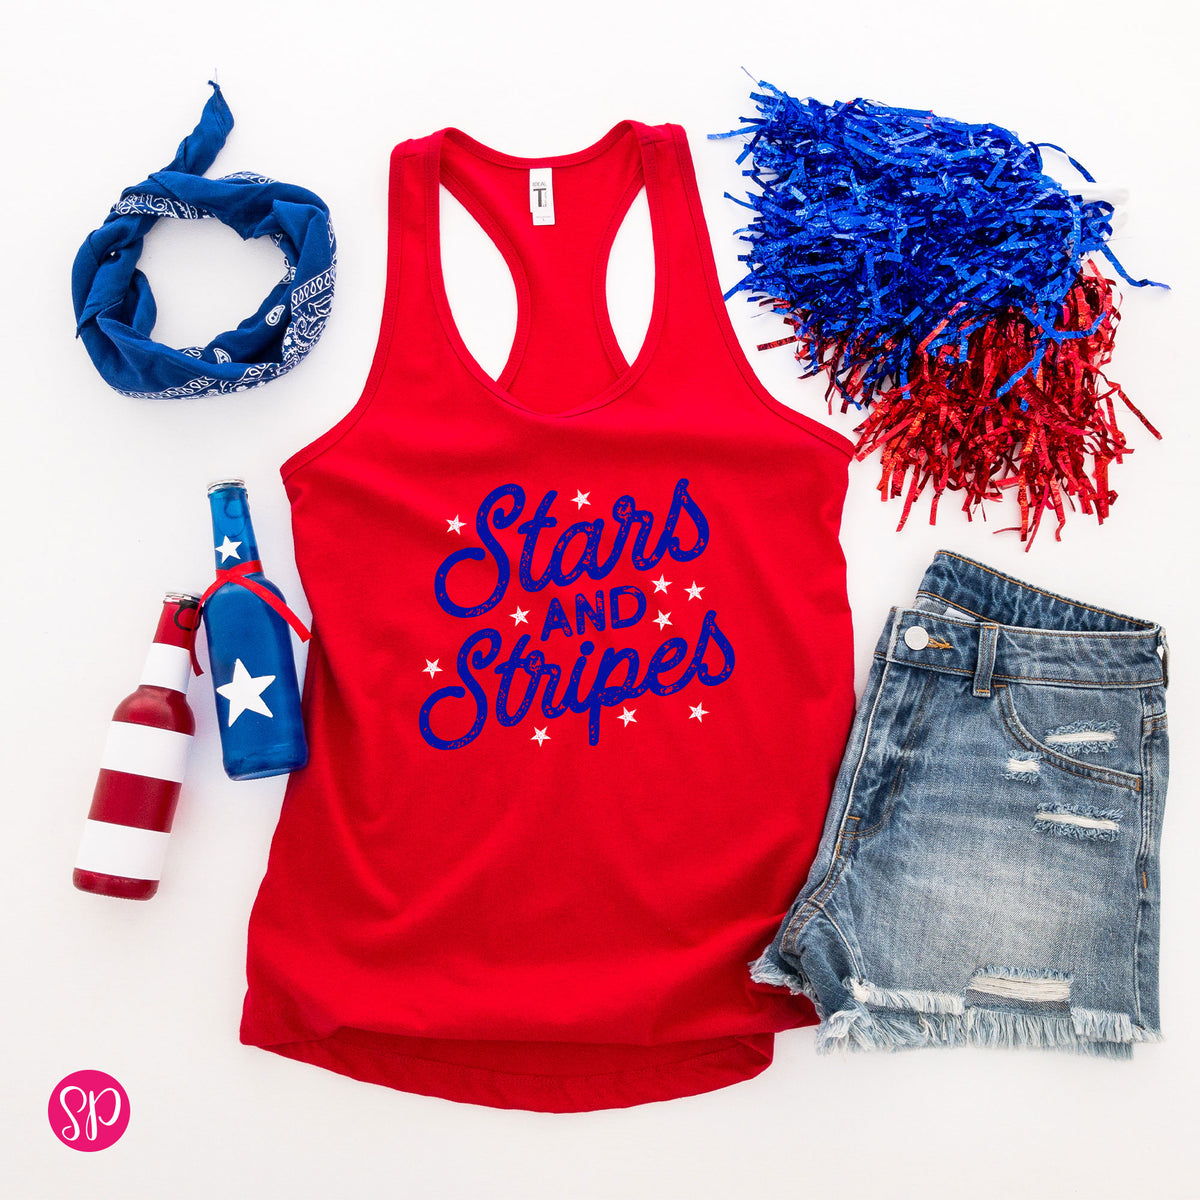 Stars and Stripes (BLUE) Tank Top